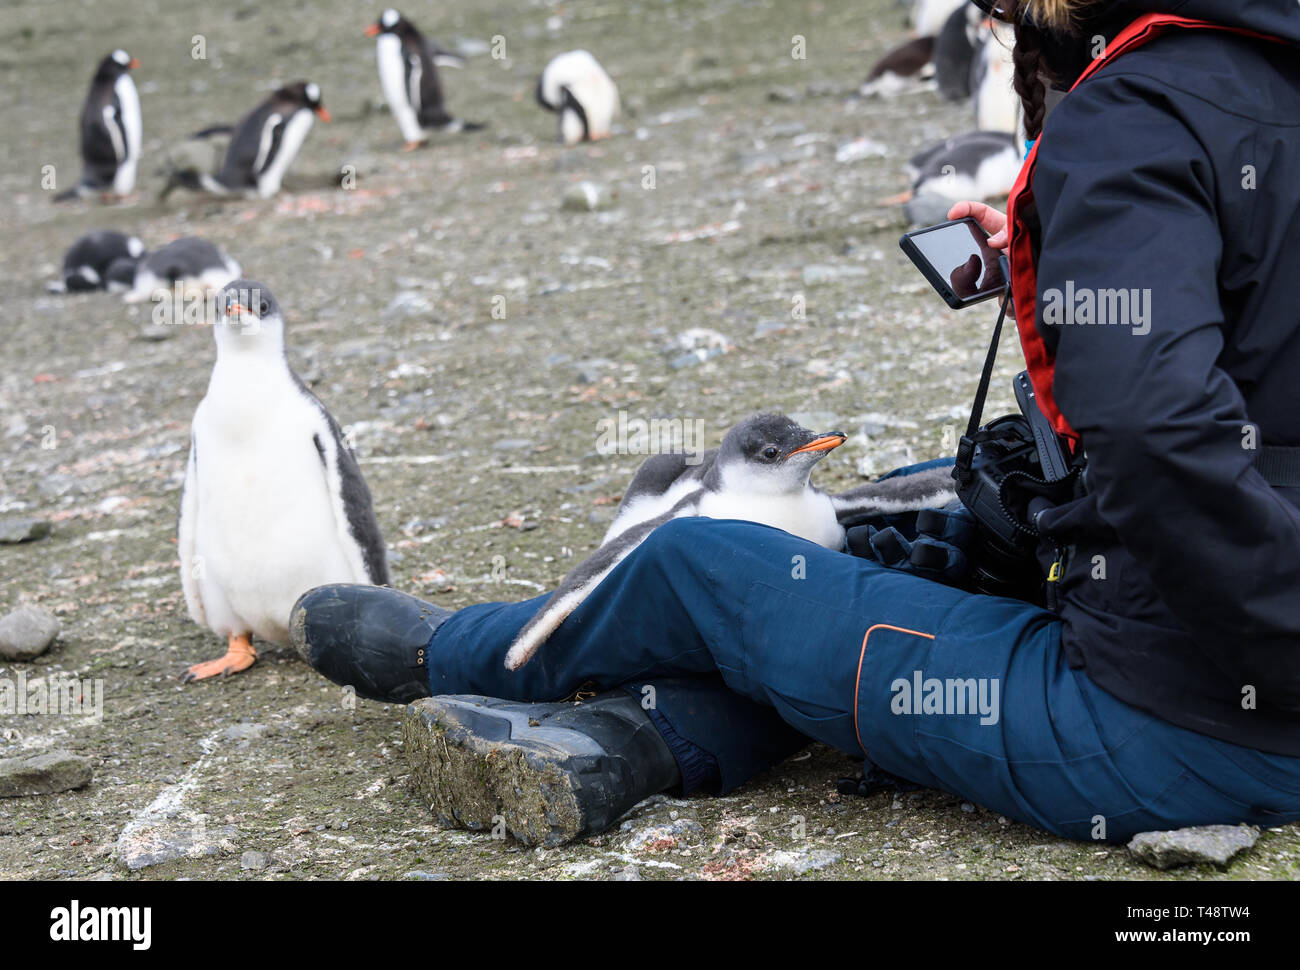 Curious Gentoo penguin chicks with woman videoing on smart phone, South Shetland Islands, Antarctica Stock Photo